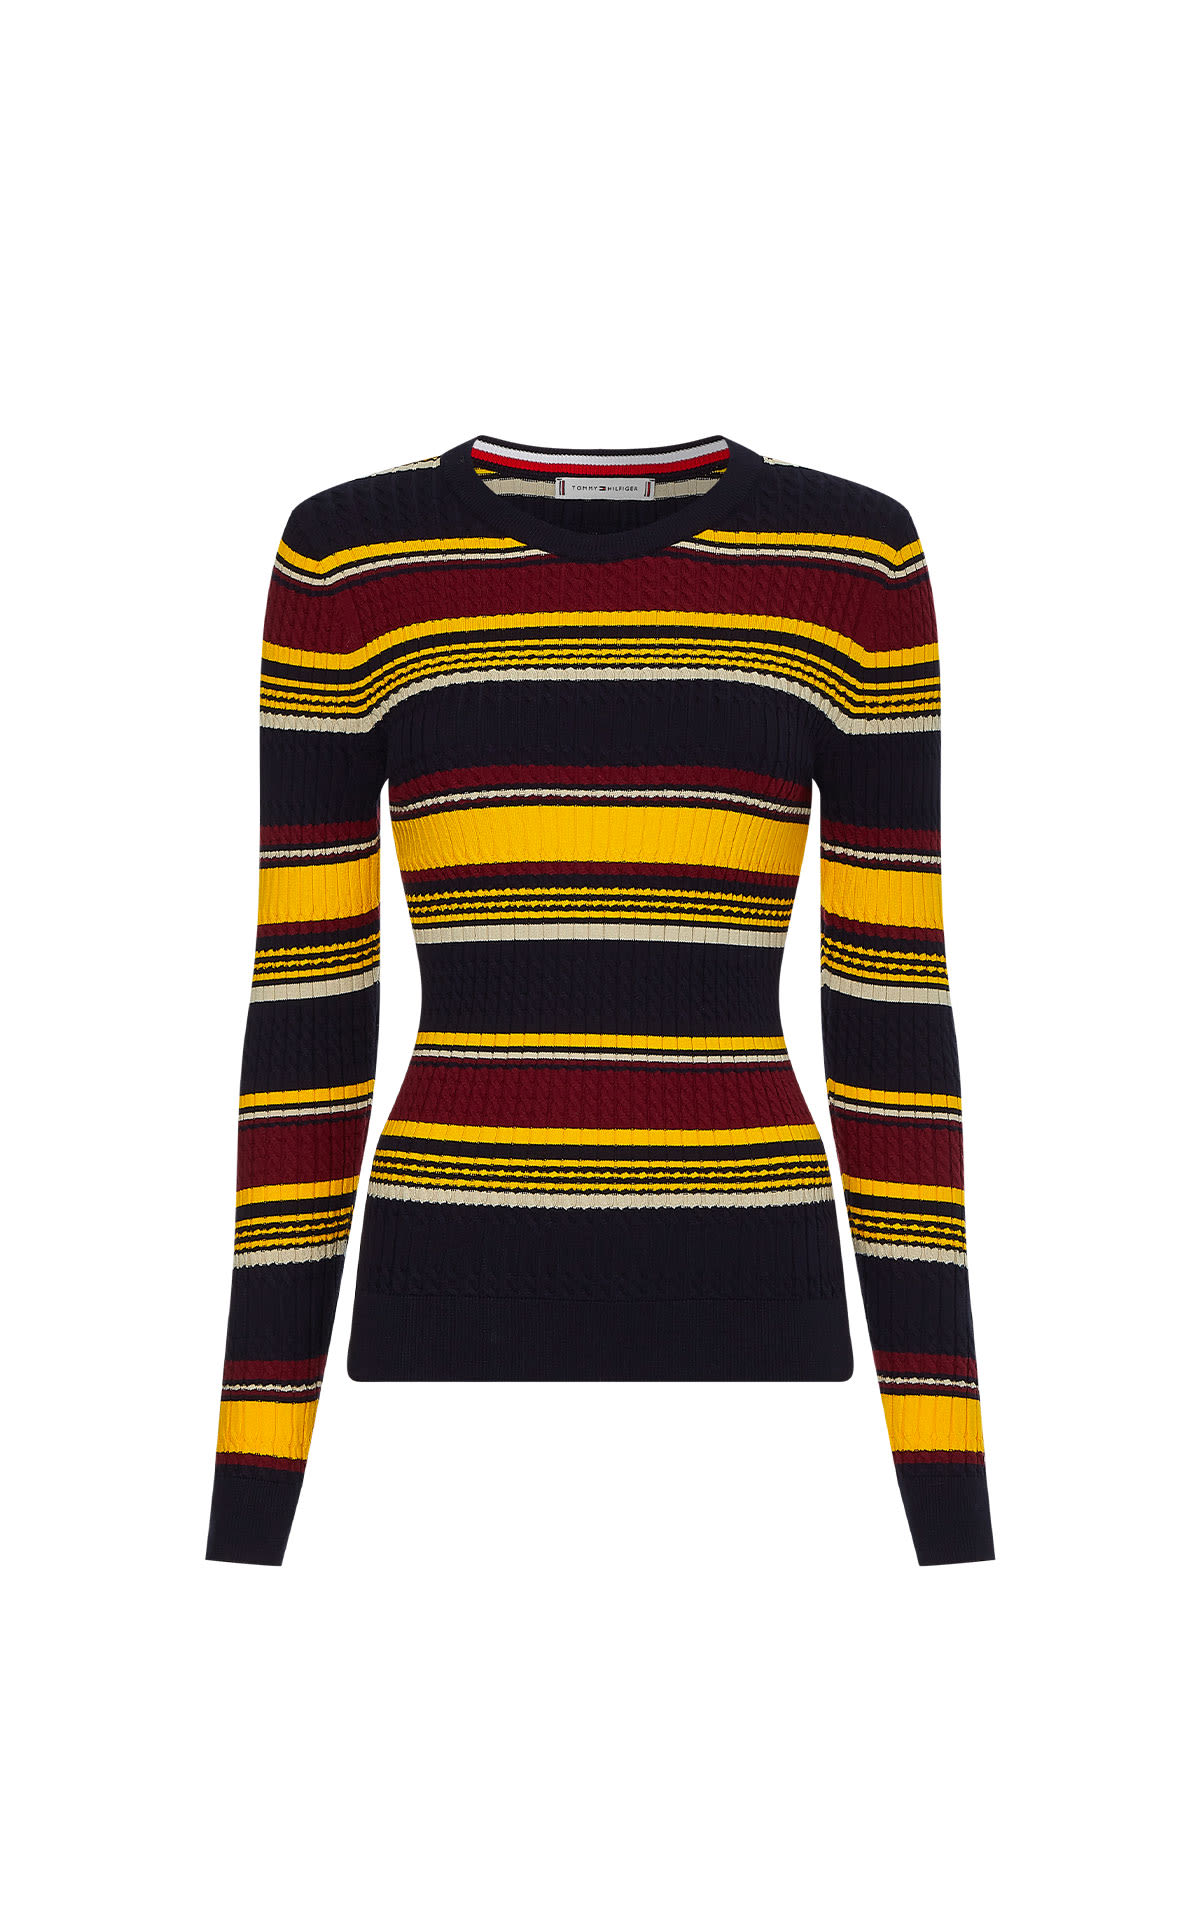 Tommy Hilfiger Multicolored striped sweater